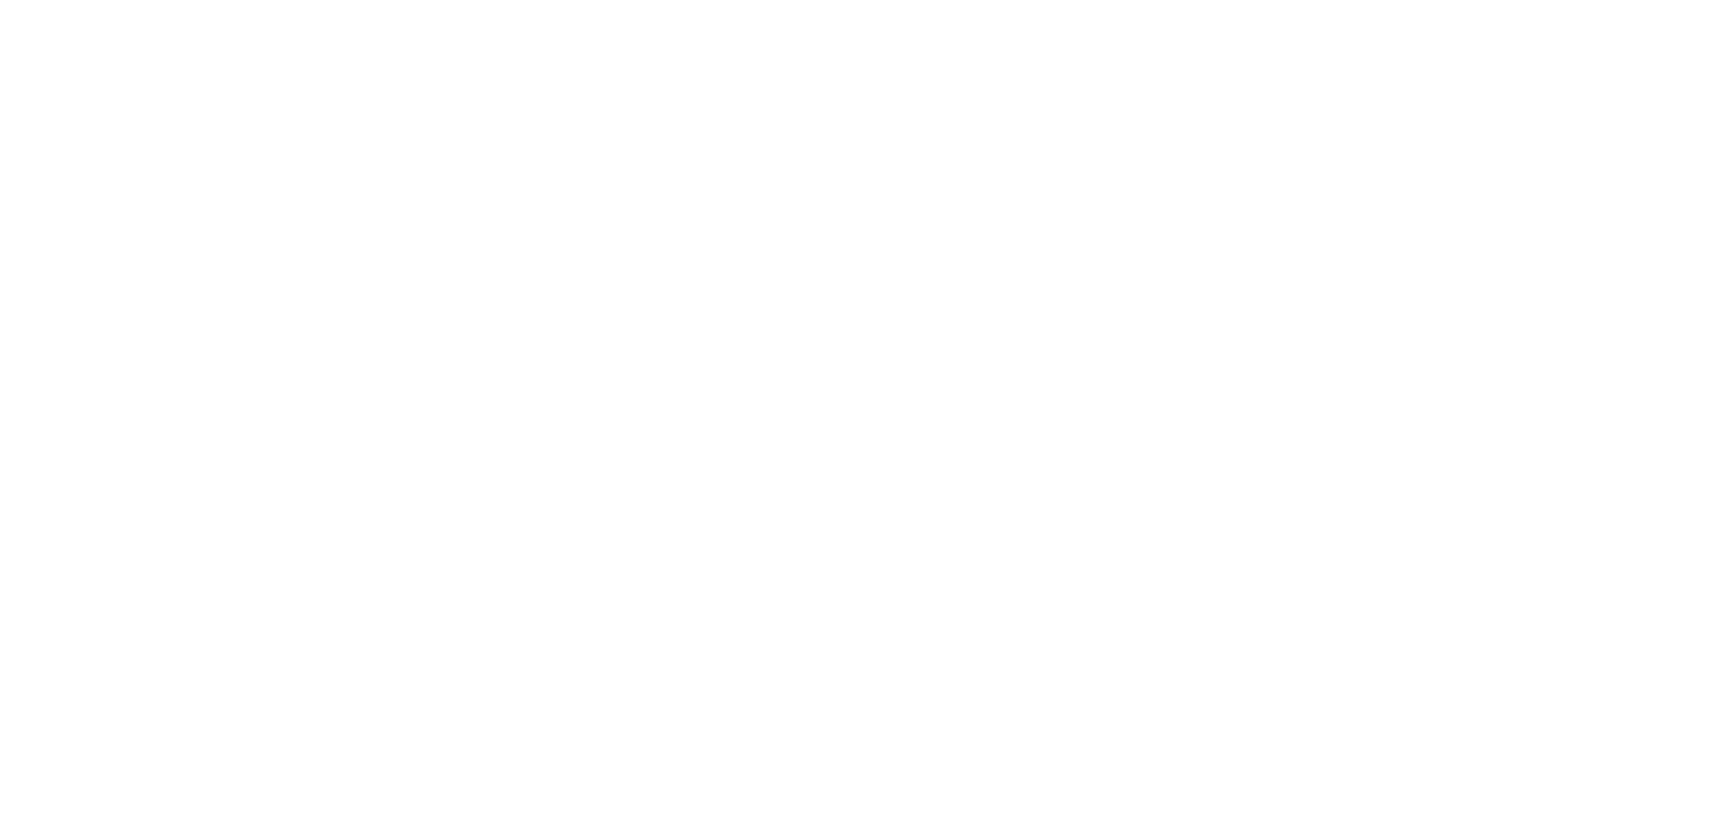 feeling-hungry-reversed_text